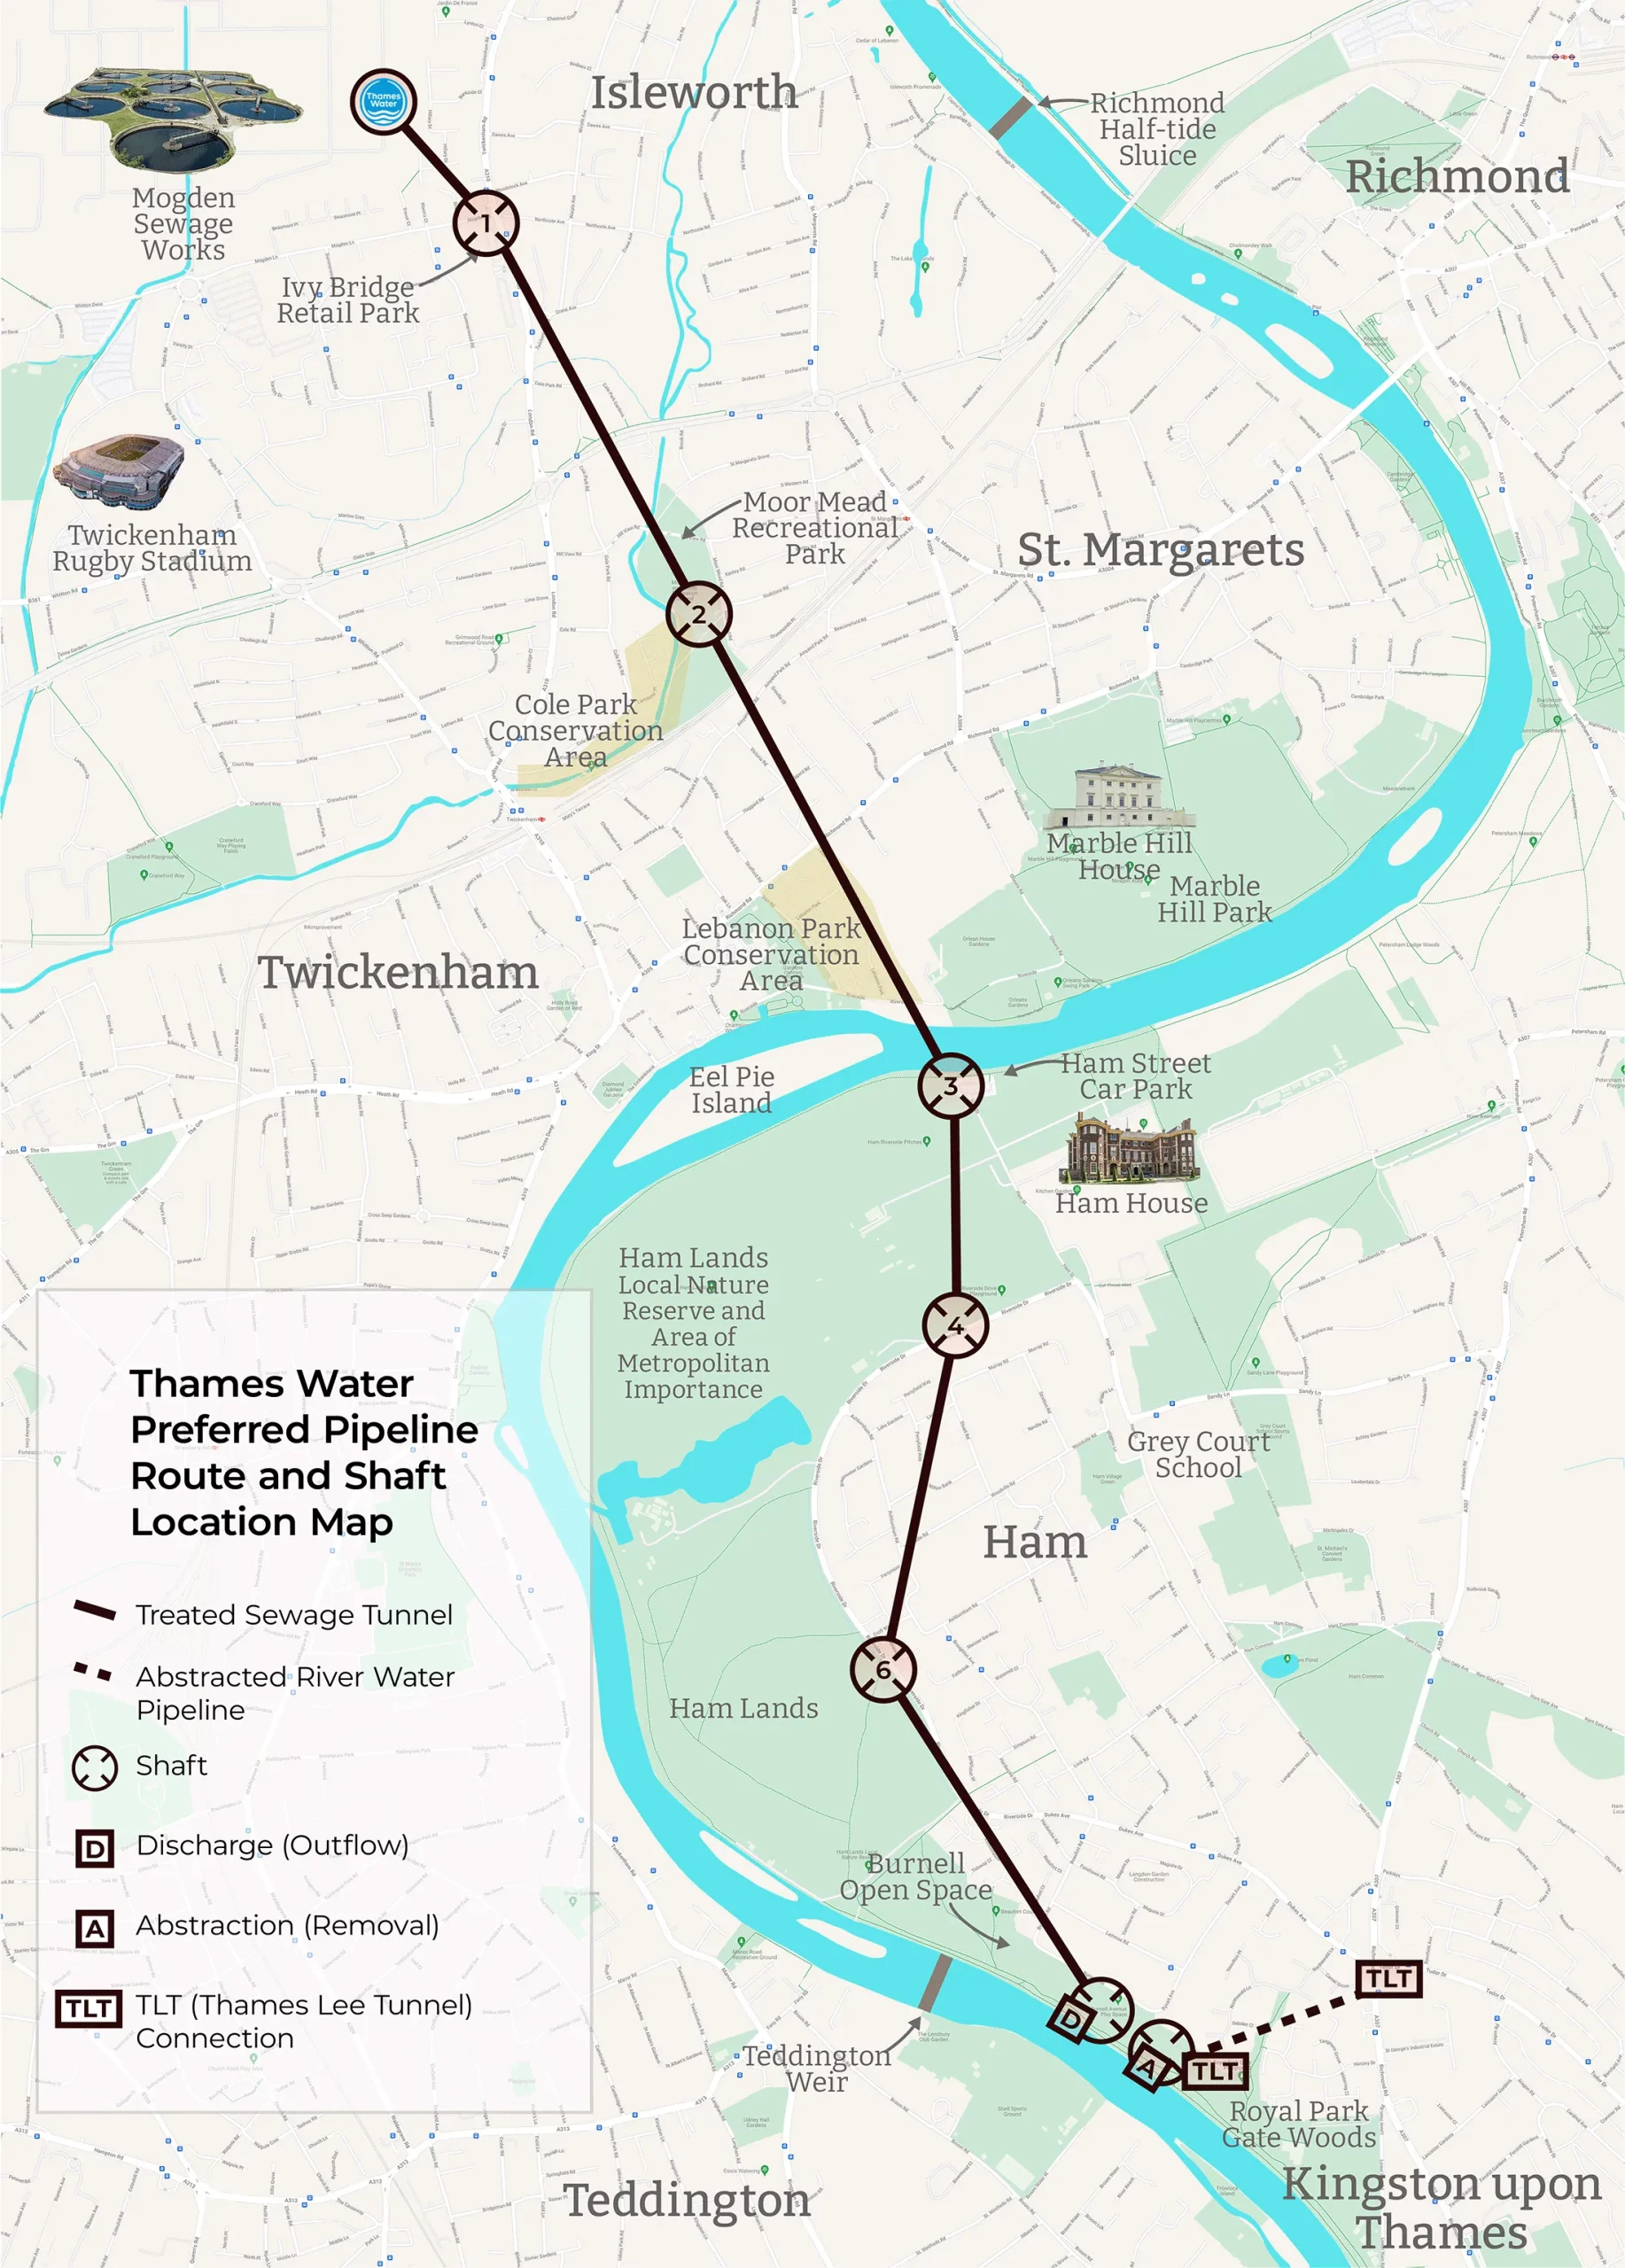 A map of Thames Water's preferred locations for the tunnel, shafts and facilities in the TDRA (Teddington Direct River Abstraction) scheme.